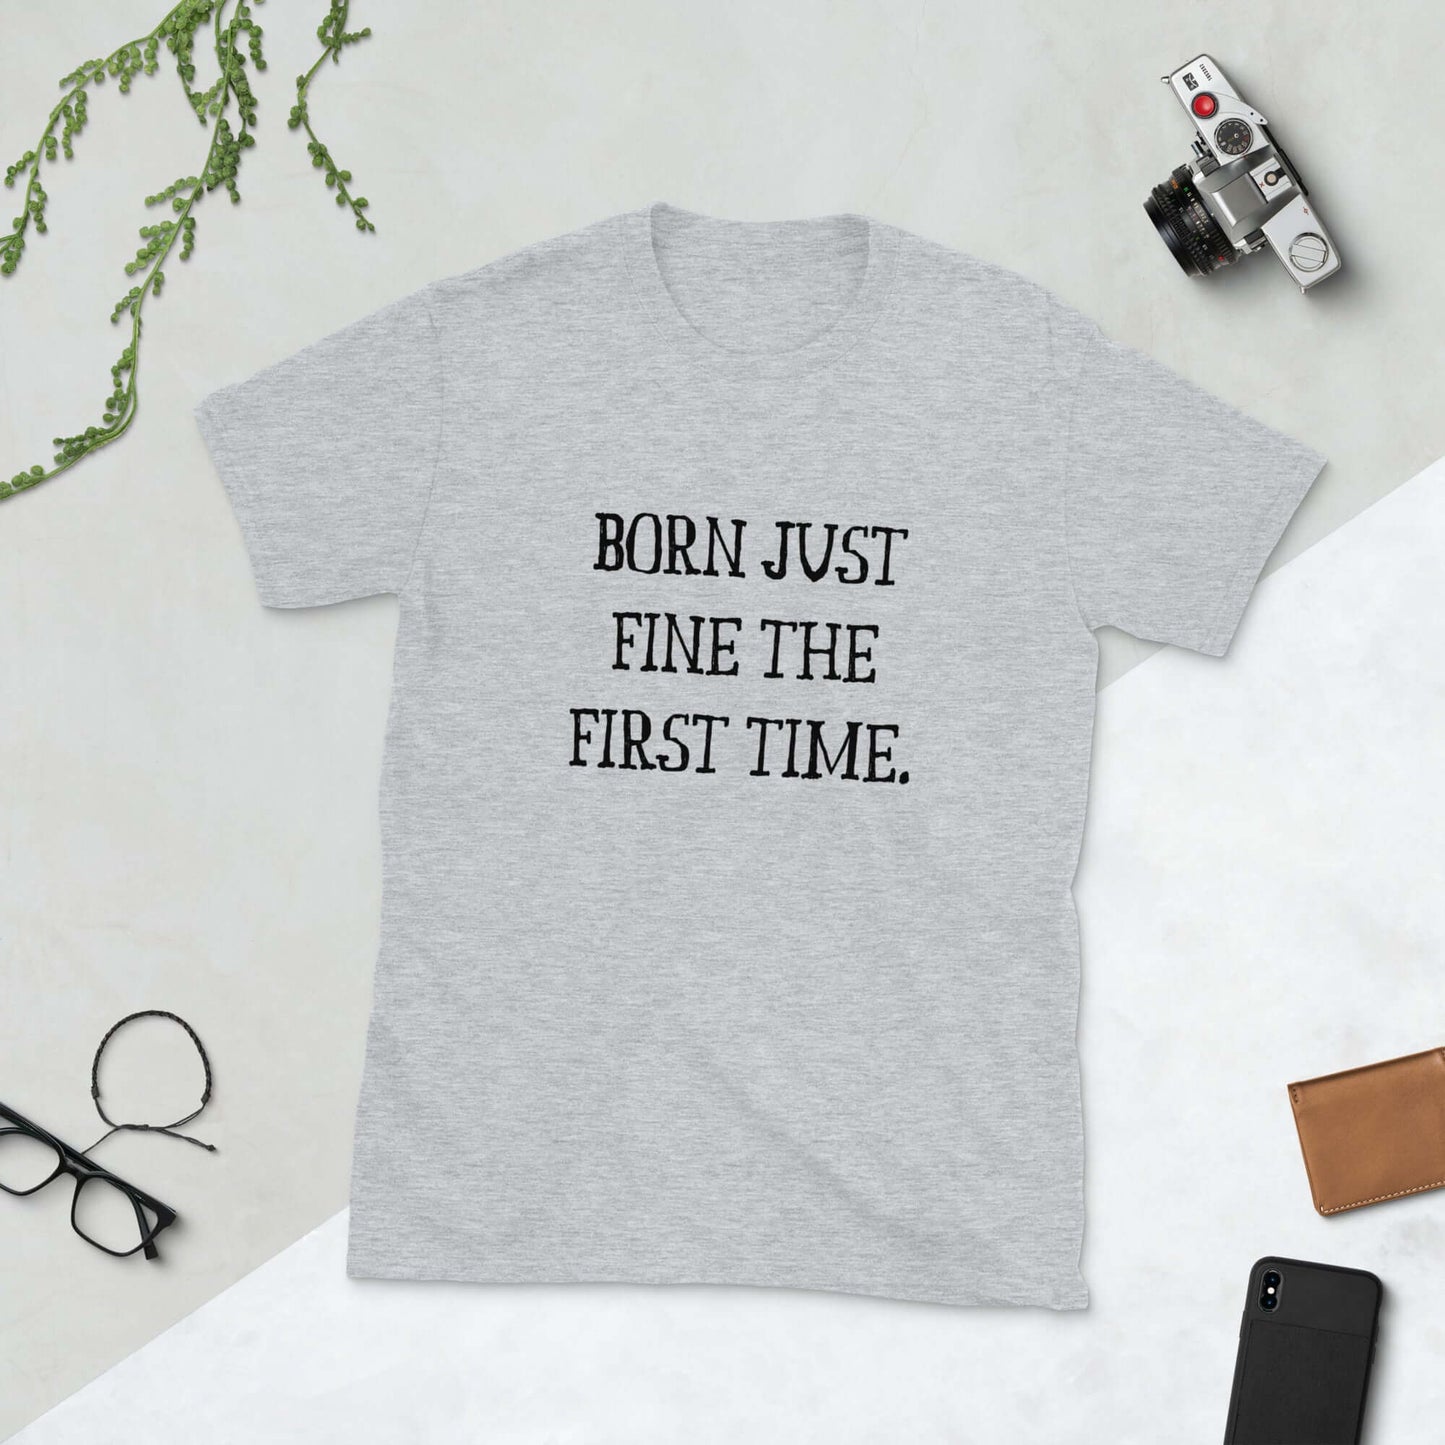 Light grey t-shirt with the words Born just fine the first time printed on the front.